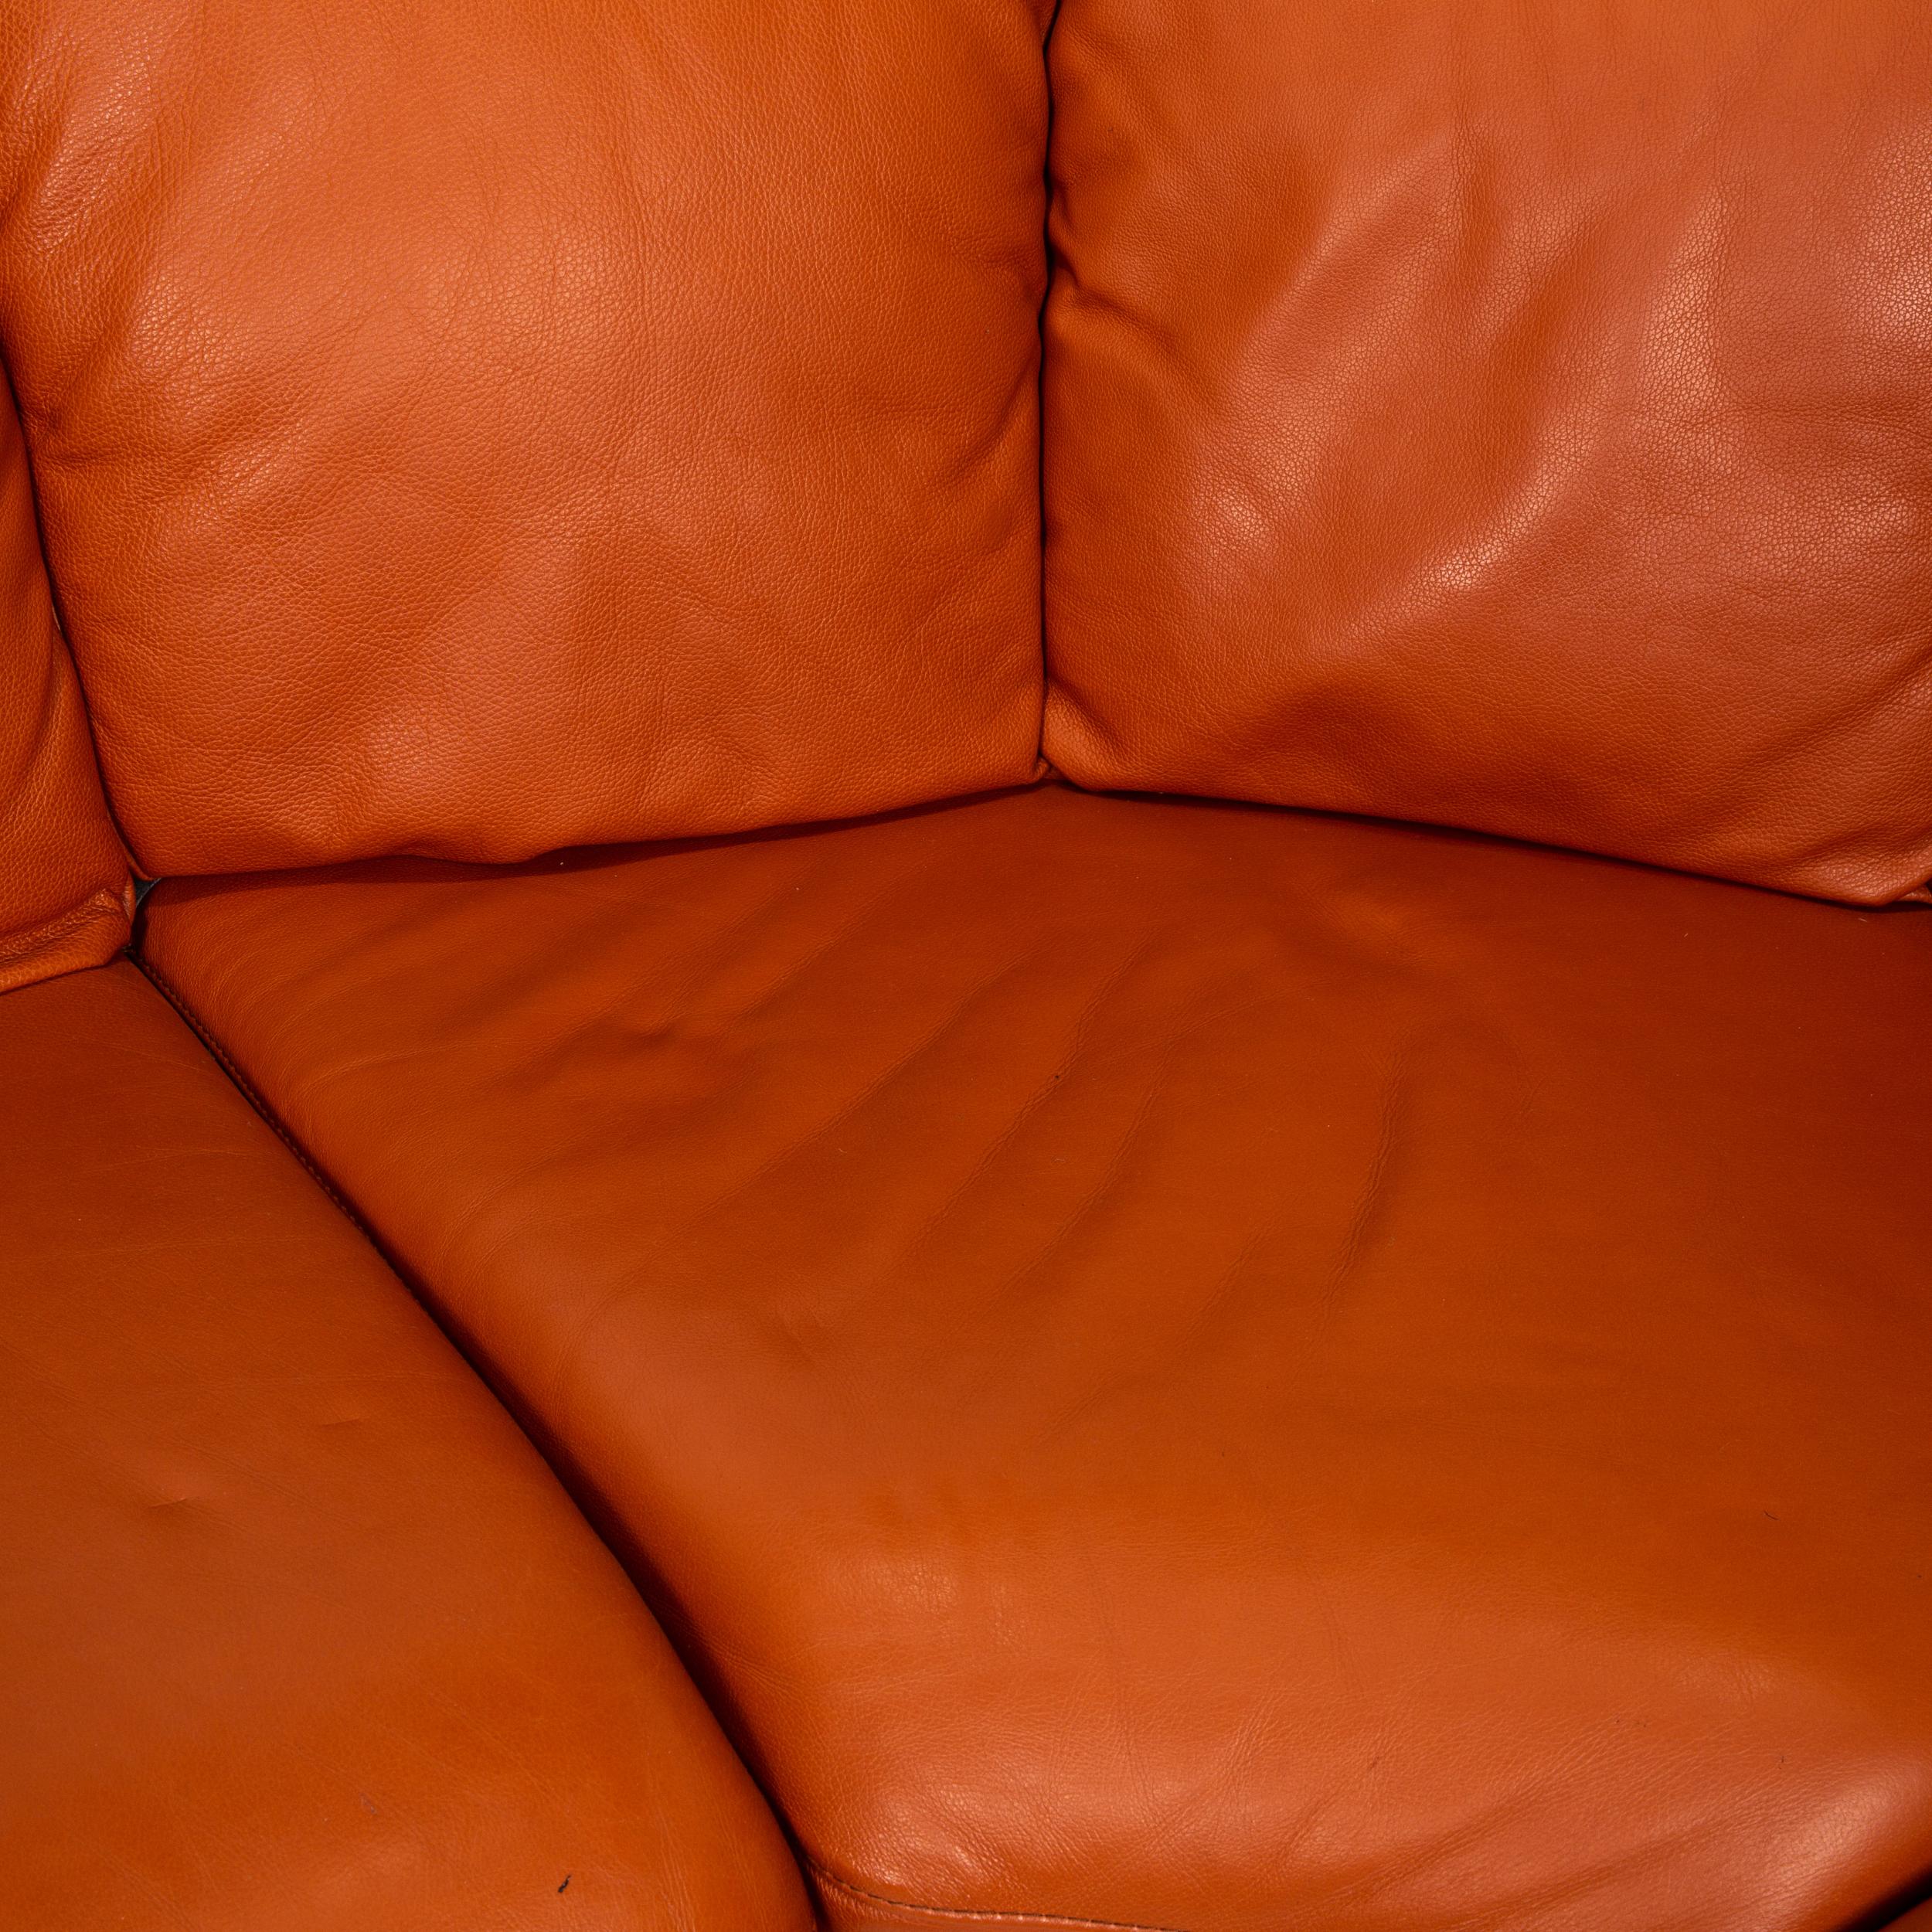 terracotta leather couch